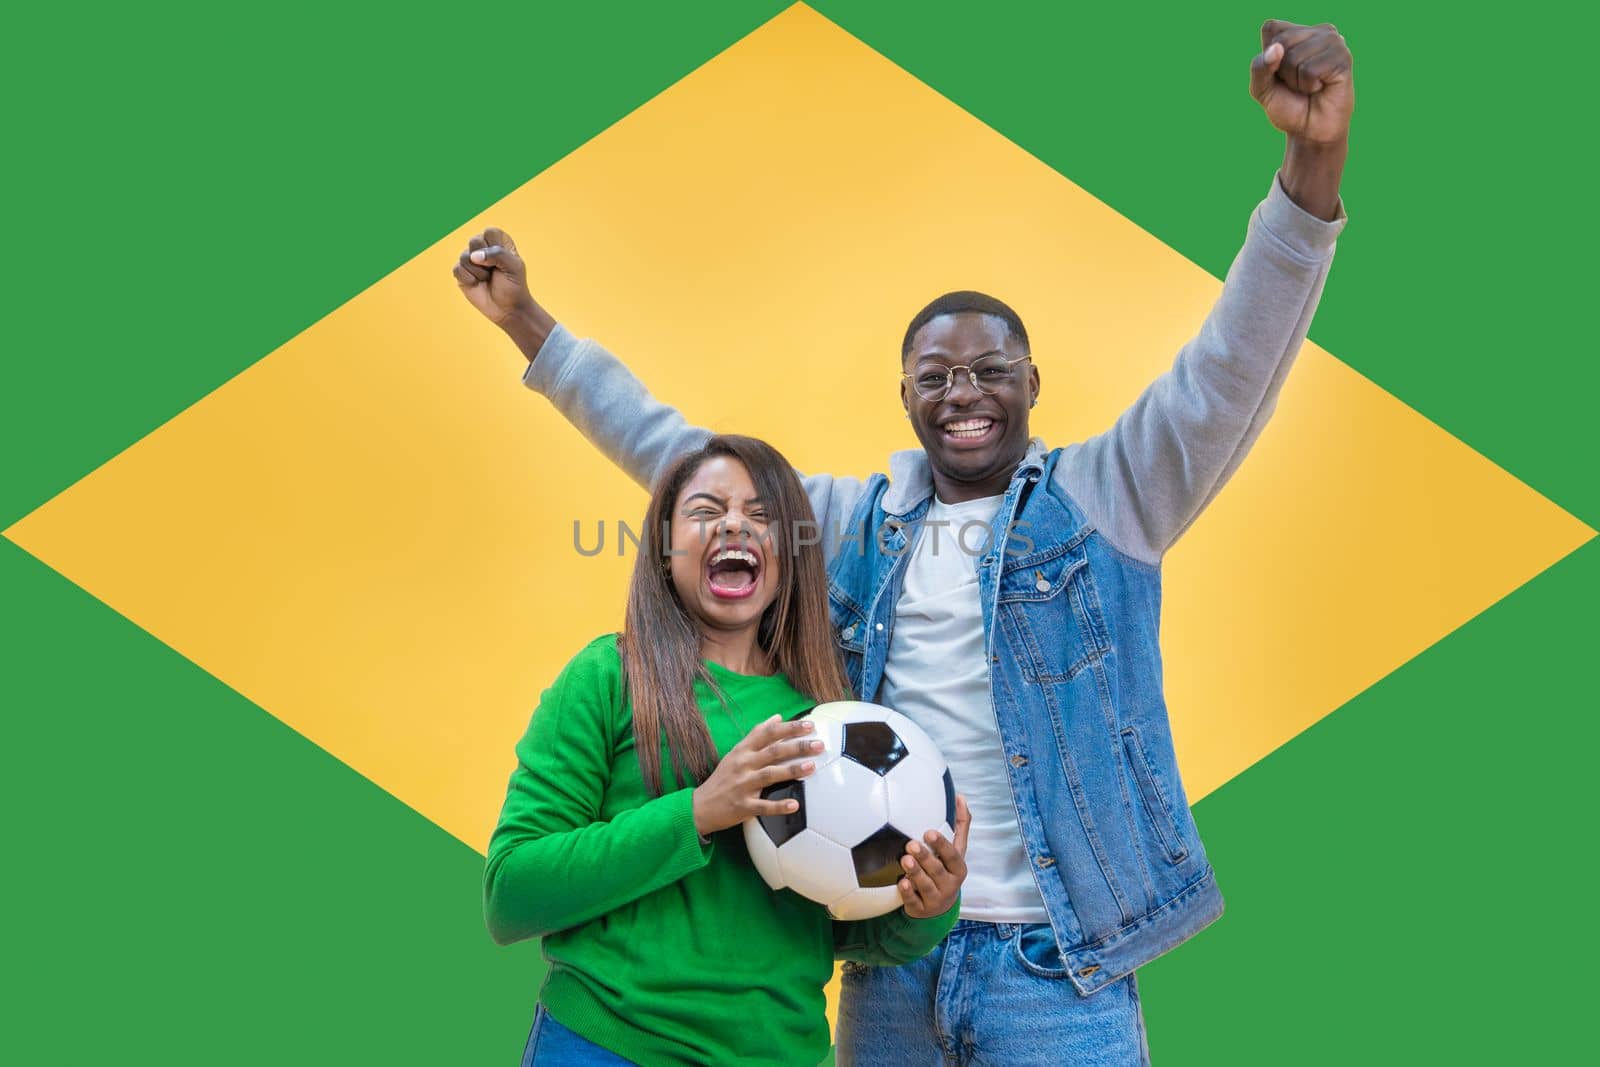 Brazilian fans couple happy celebrating football or soccer game on yellow and green background. High quality photo